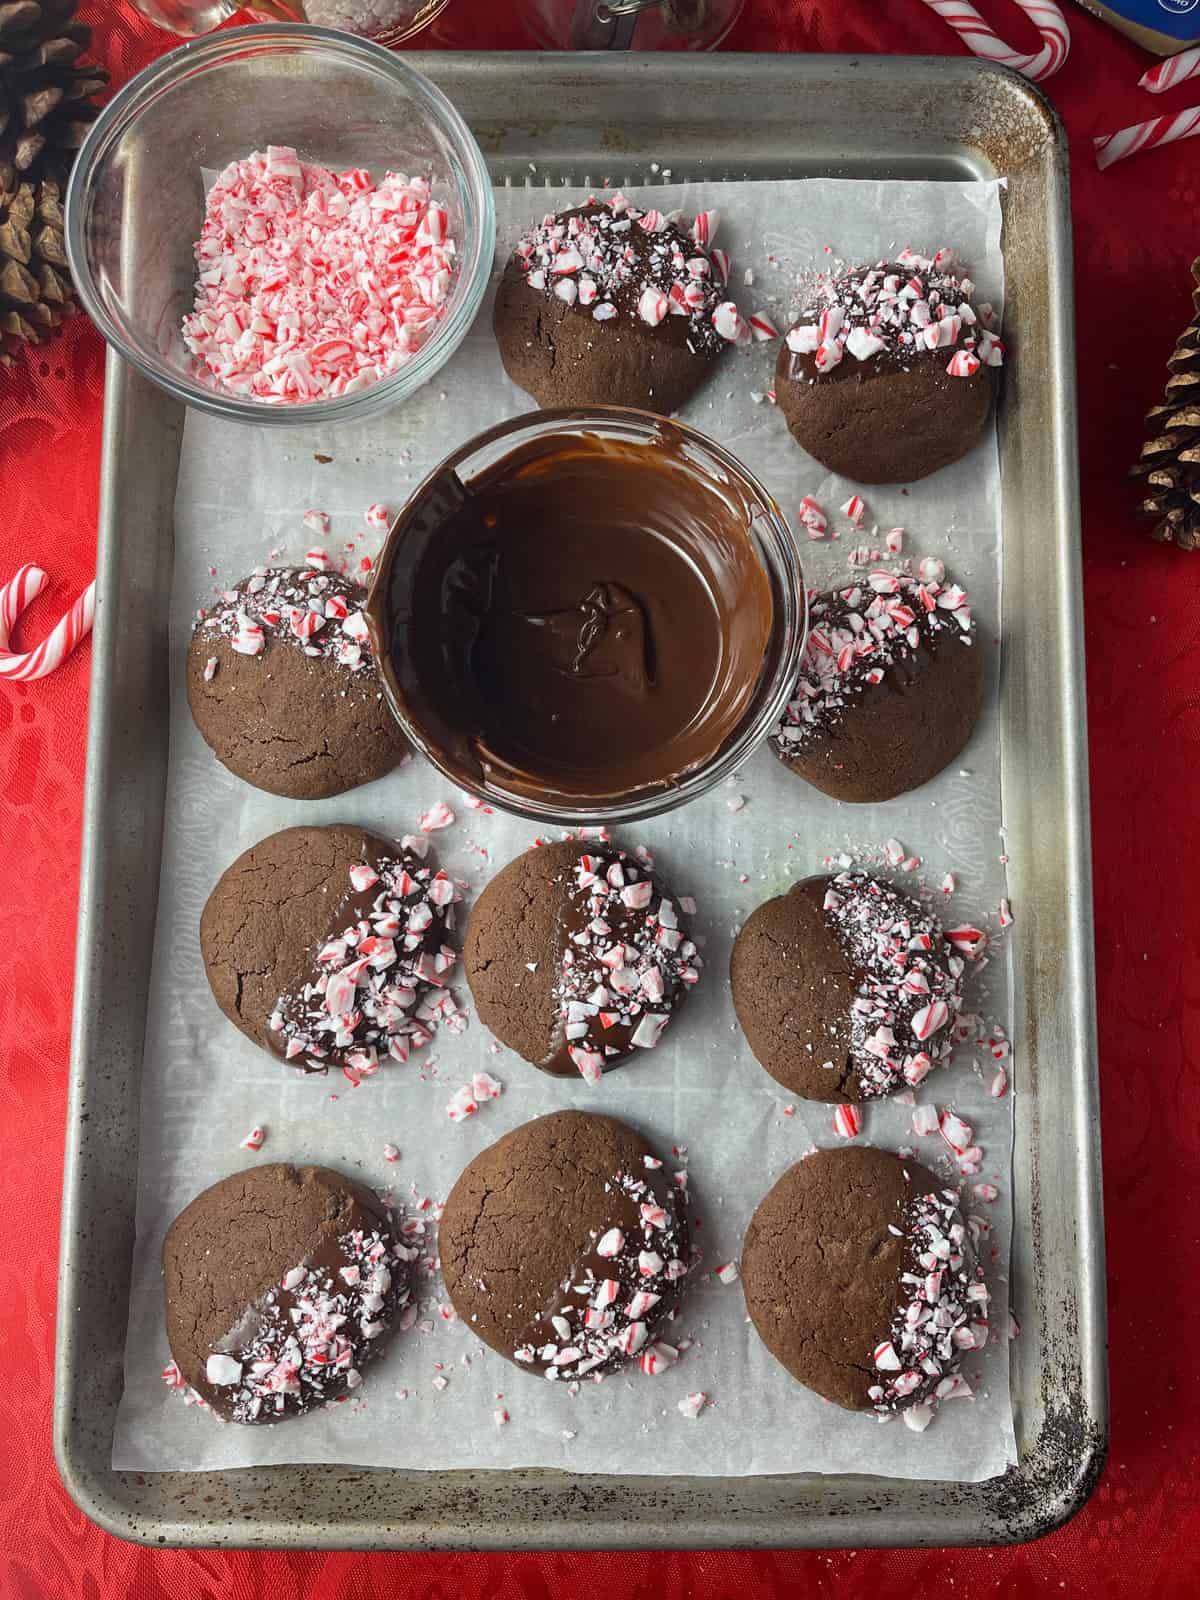 Cookies dipped in melted chocolate and drying on a parchment lined cookie sheet.